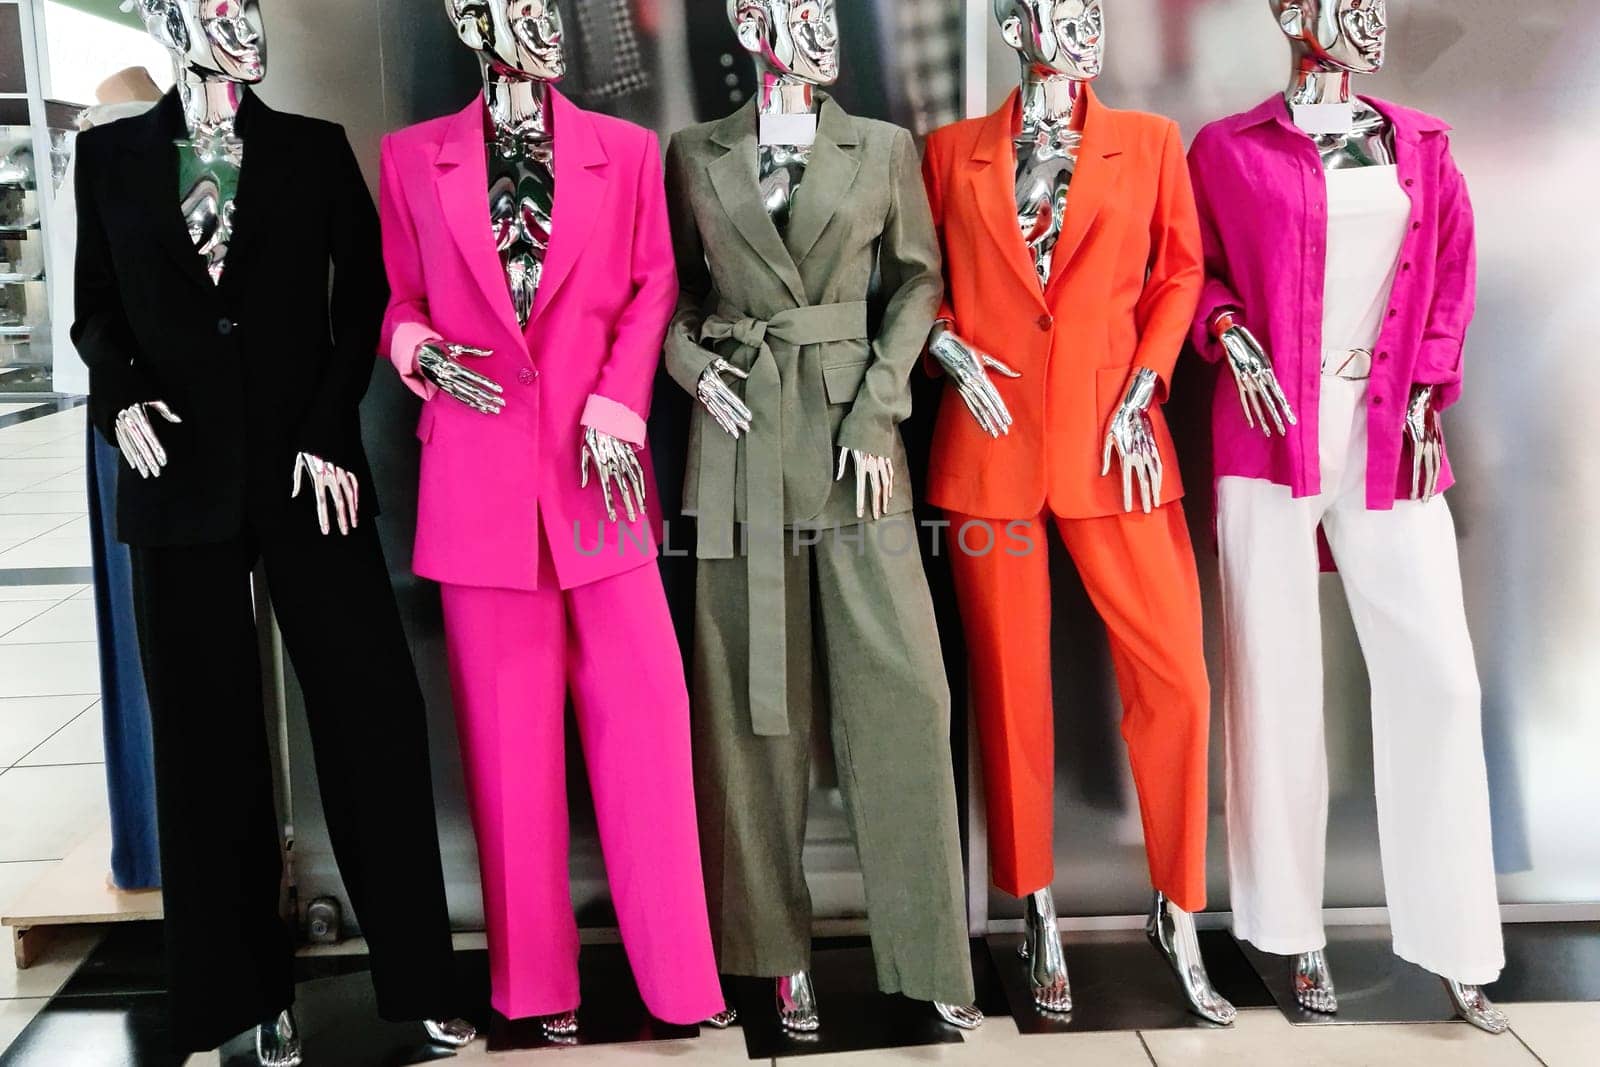 Colorful women's clothing in a boutique is worn on mannequins.